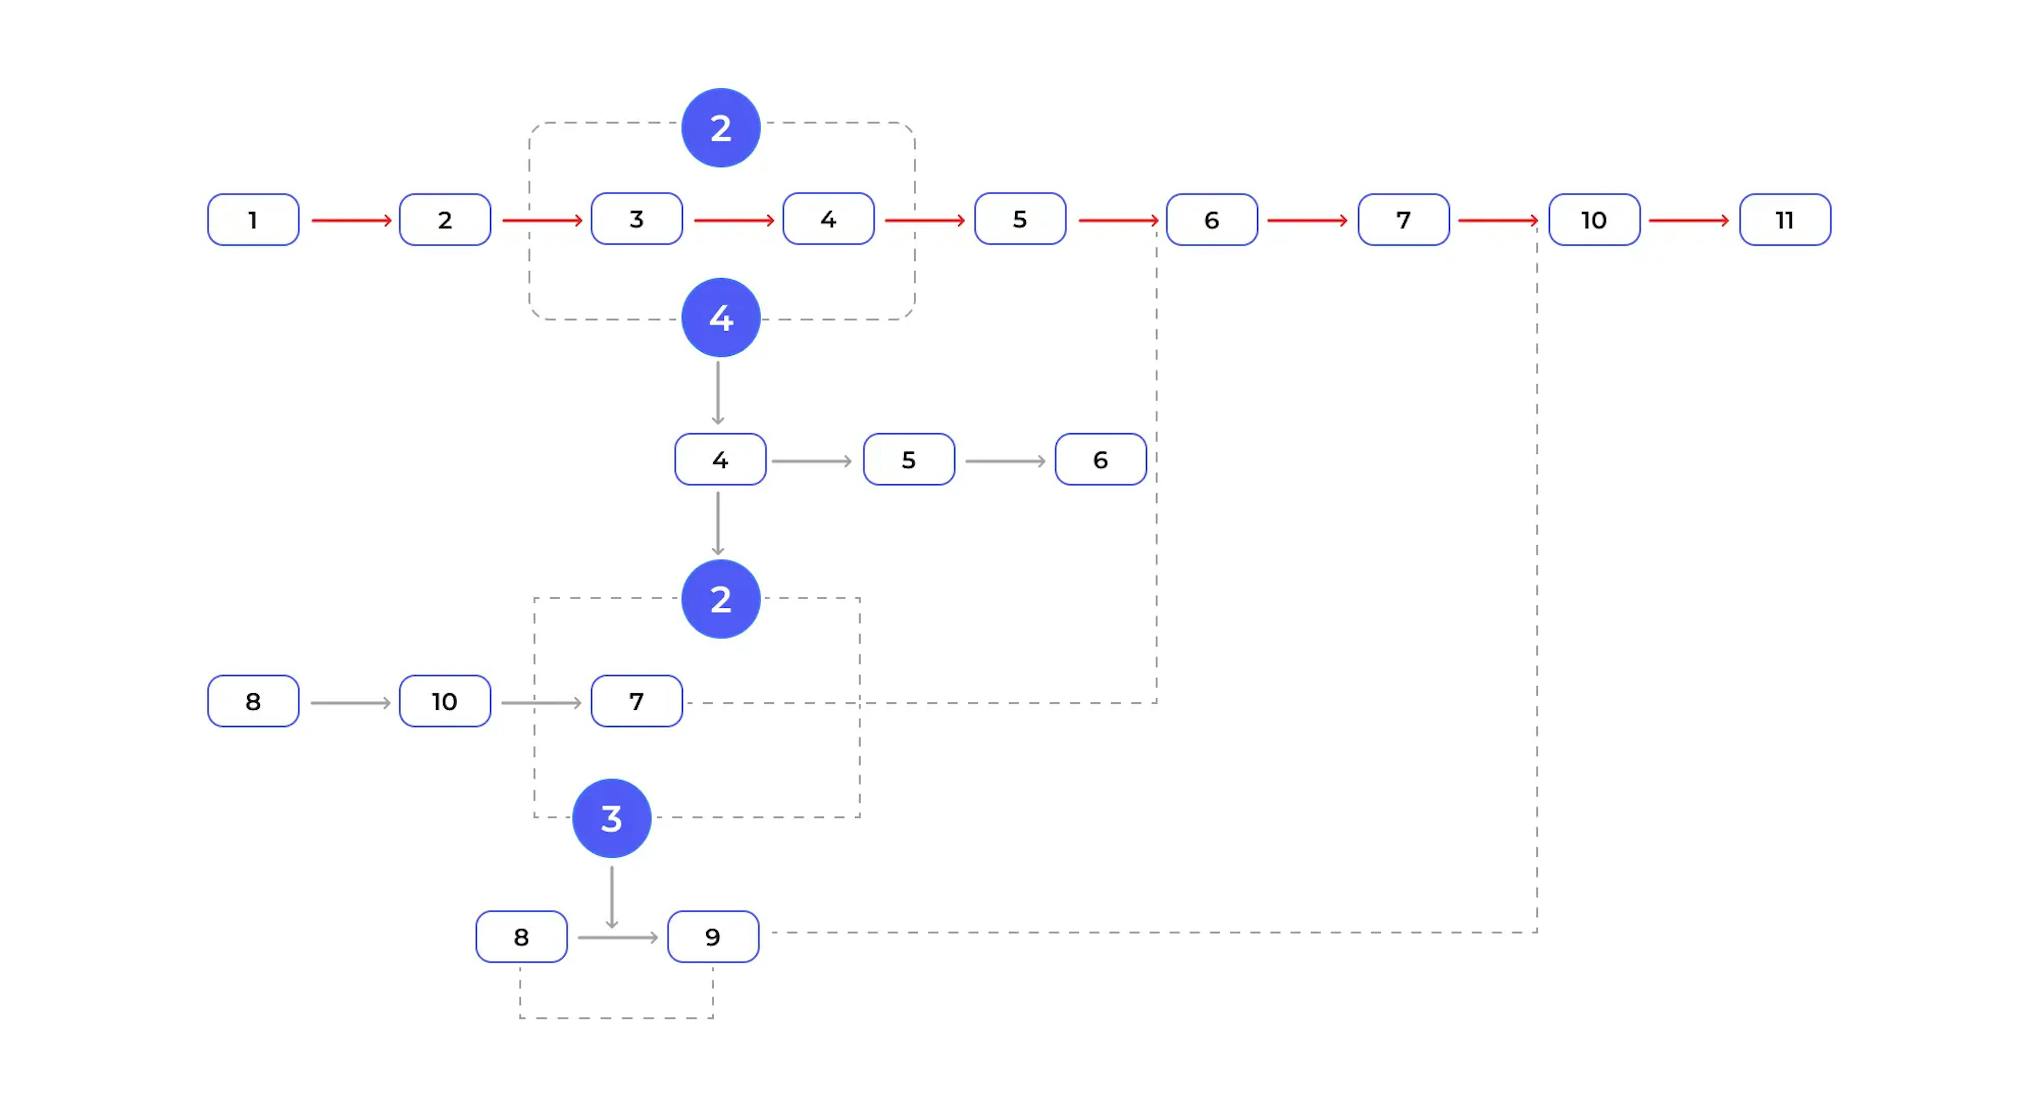 Update the Project Network Diagram